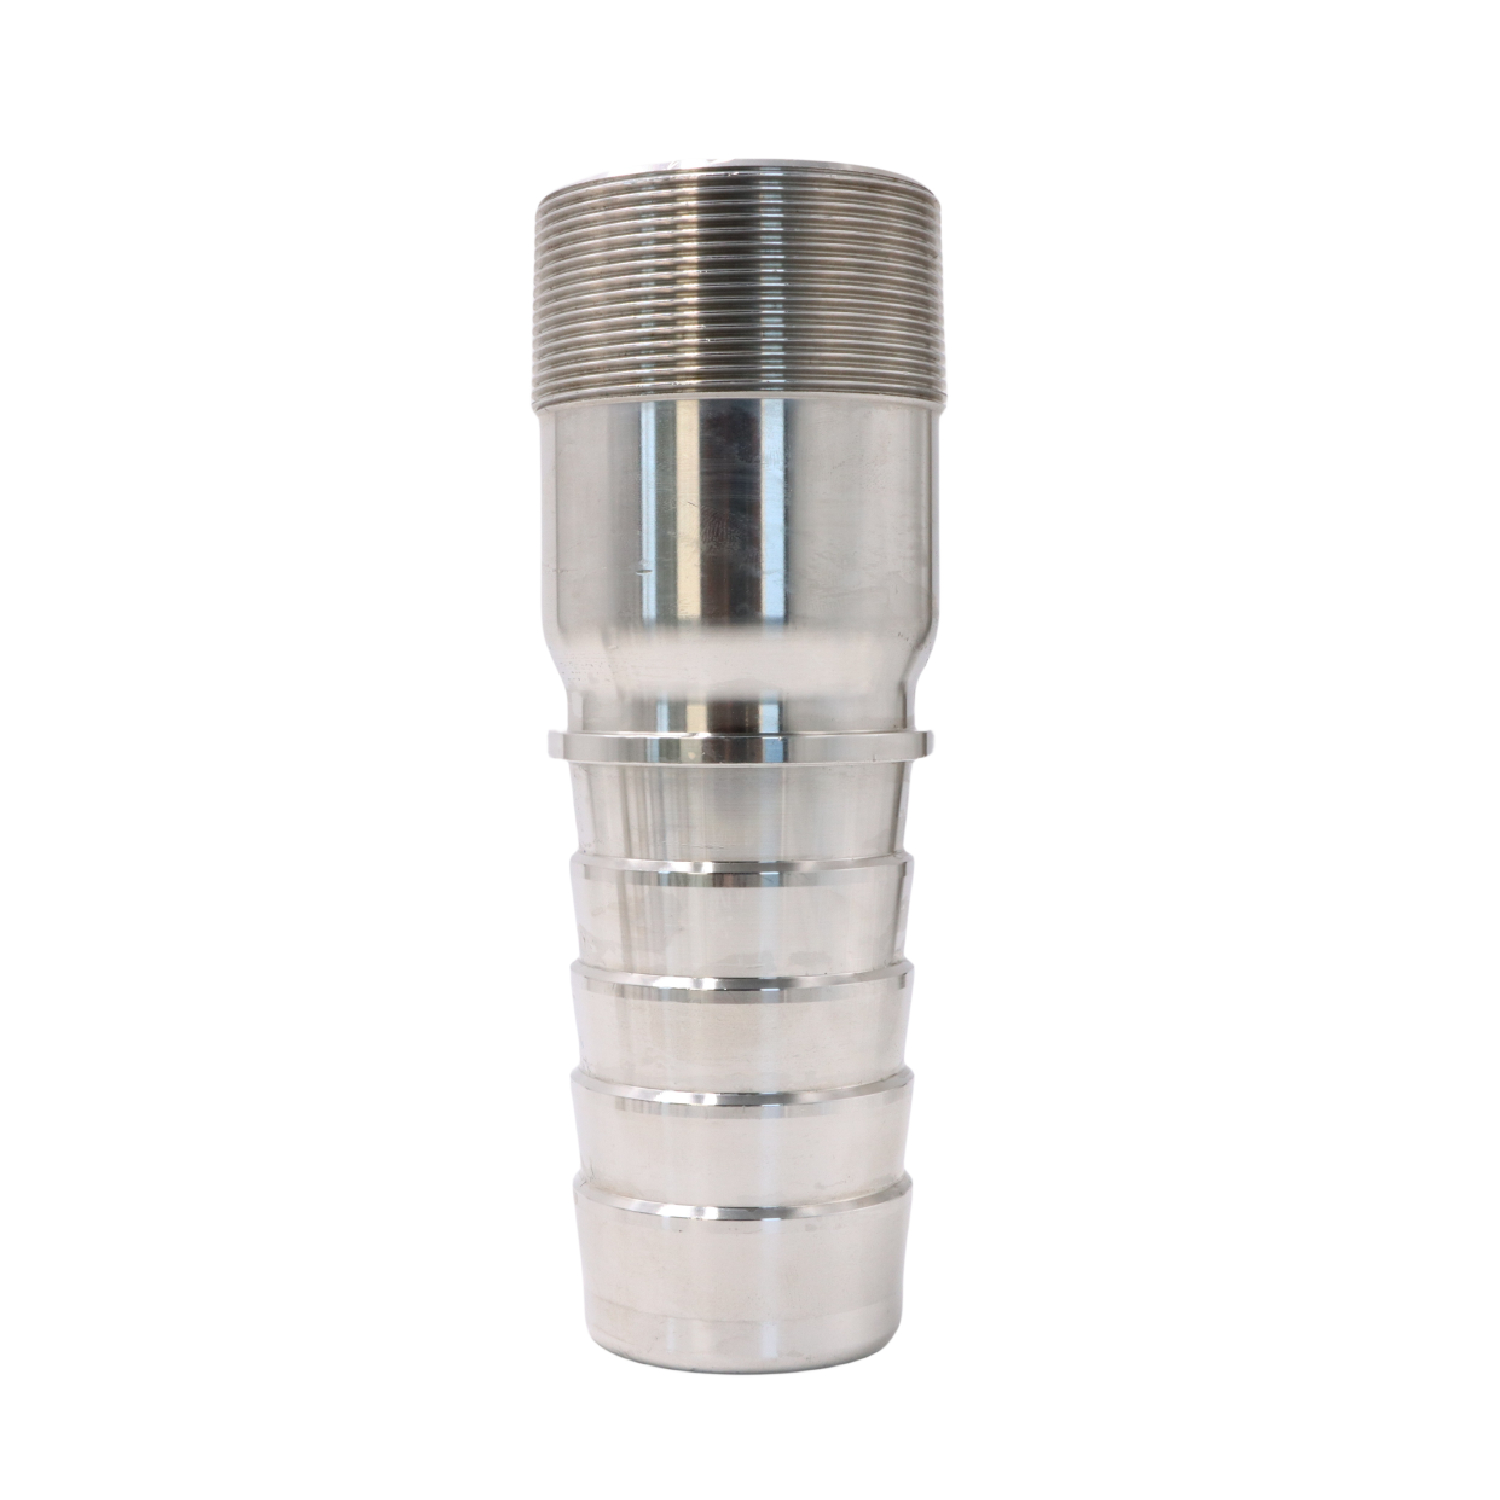 SS316 Stainless Steel Sanitary High Pressure DIN11864 JN-FL 23 2012 Male Hose Nipple Coupling Adapter For Beverages